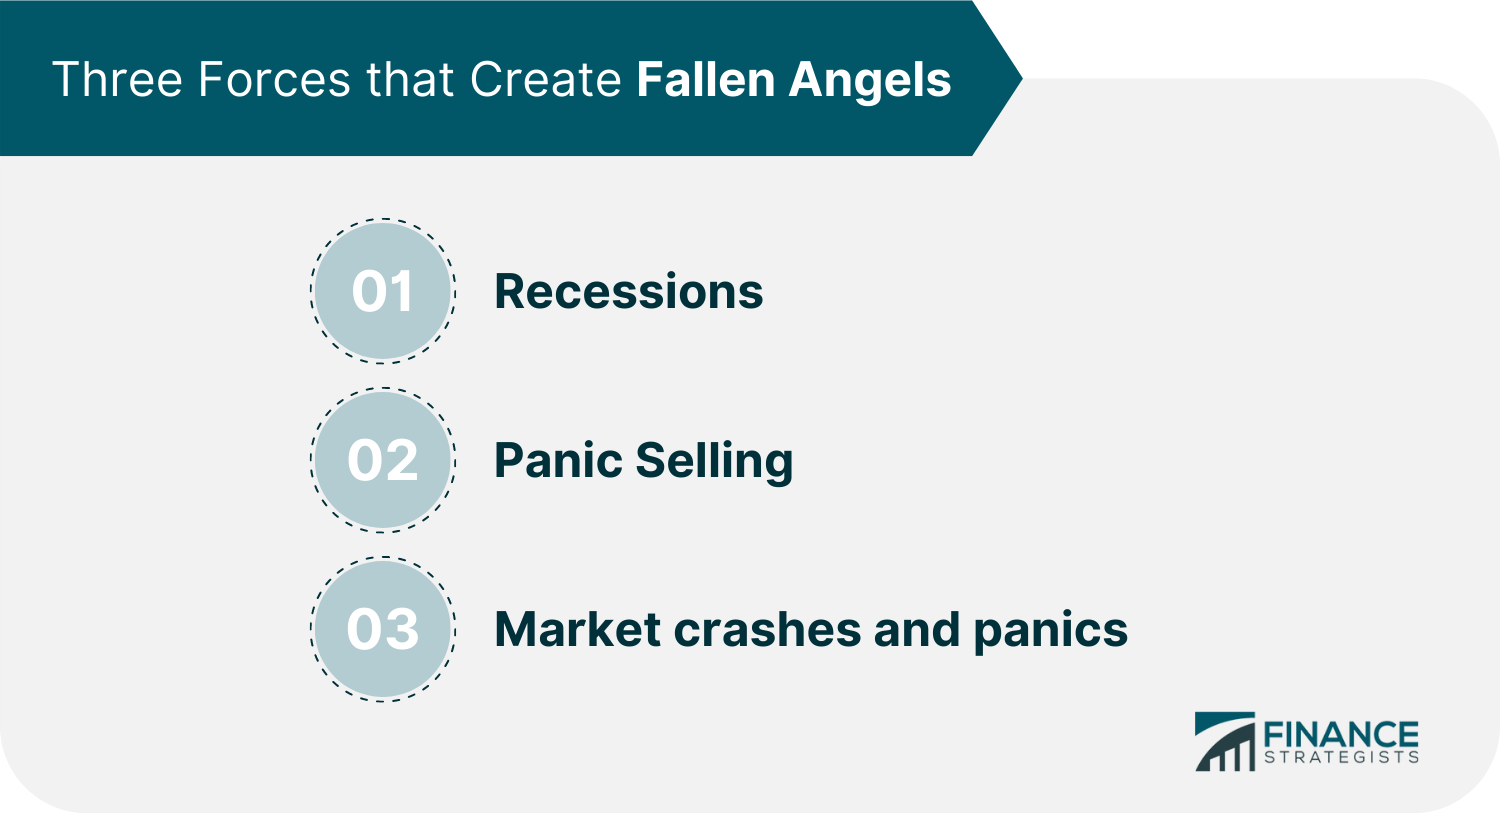 Three Forces that Create Fallen Angels